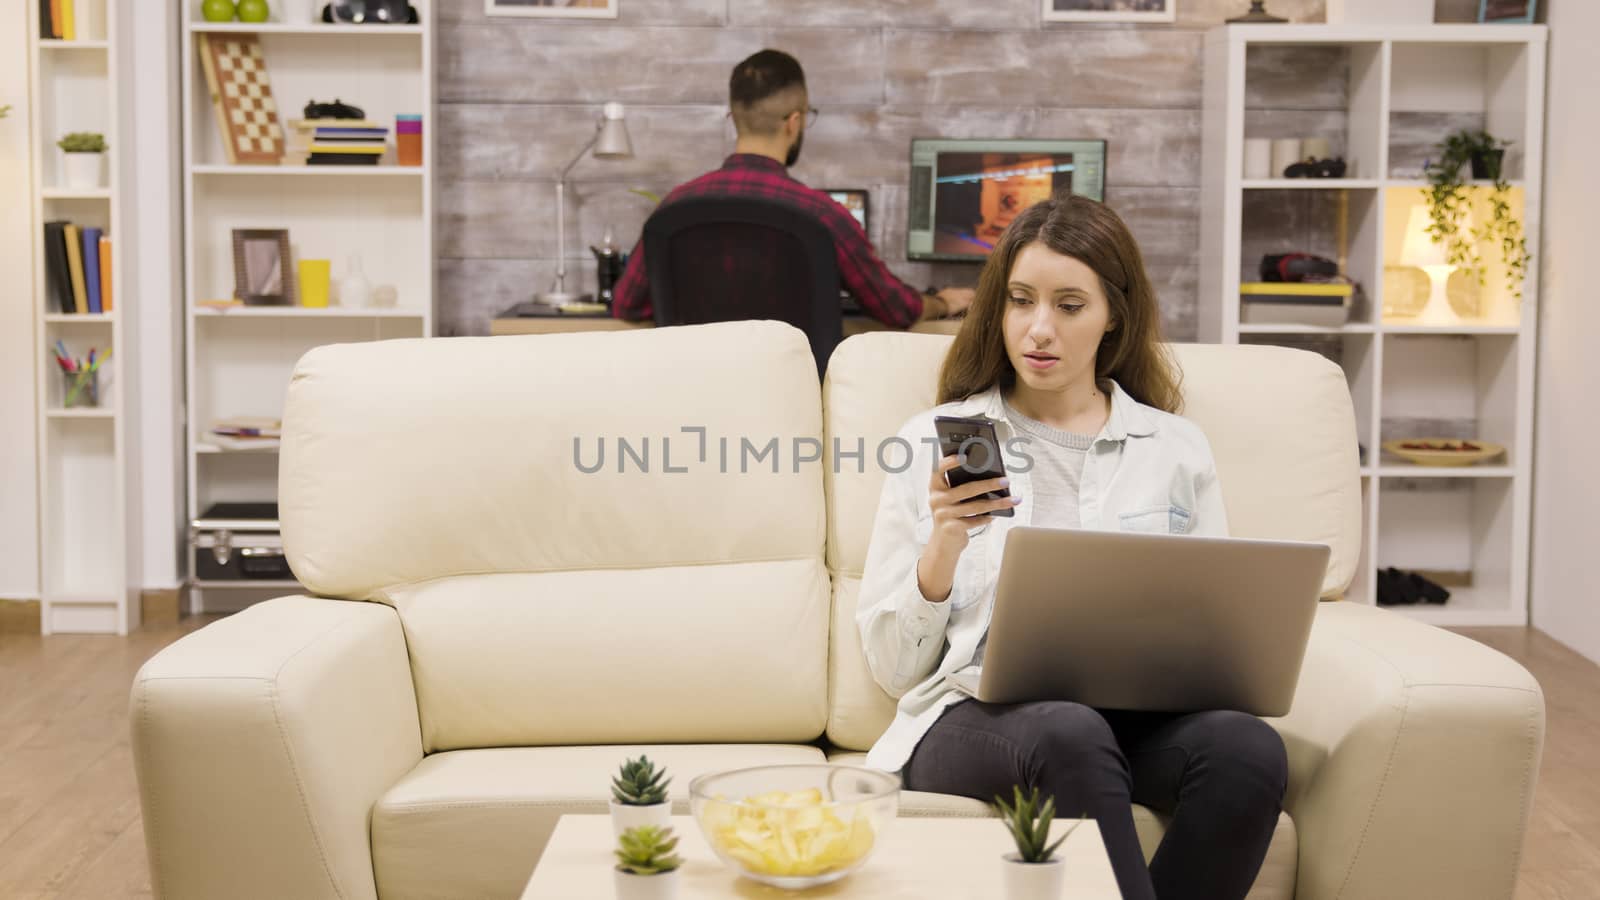 Girl using her phone and laptop while sitting on couch. Boyfriend in the background.